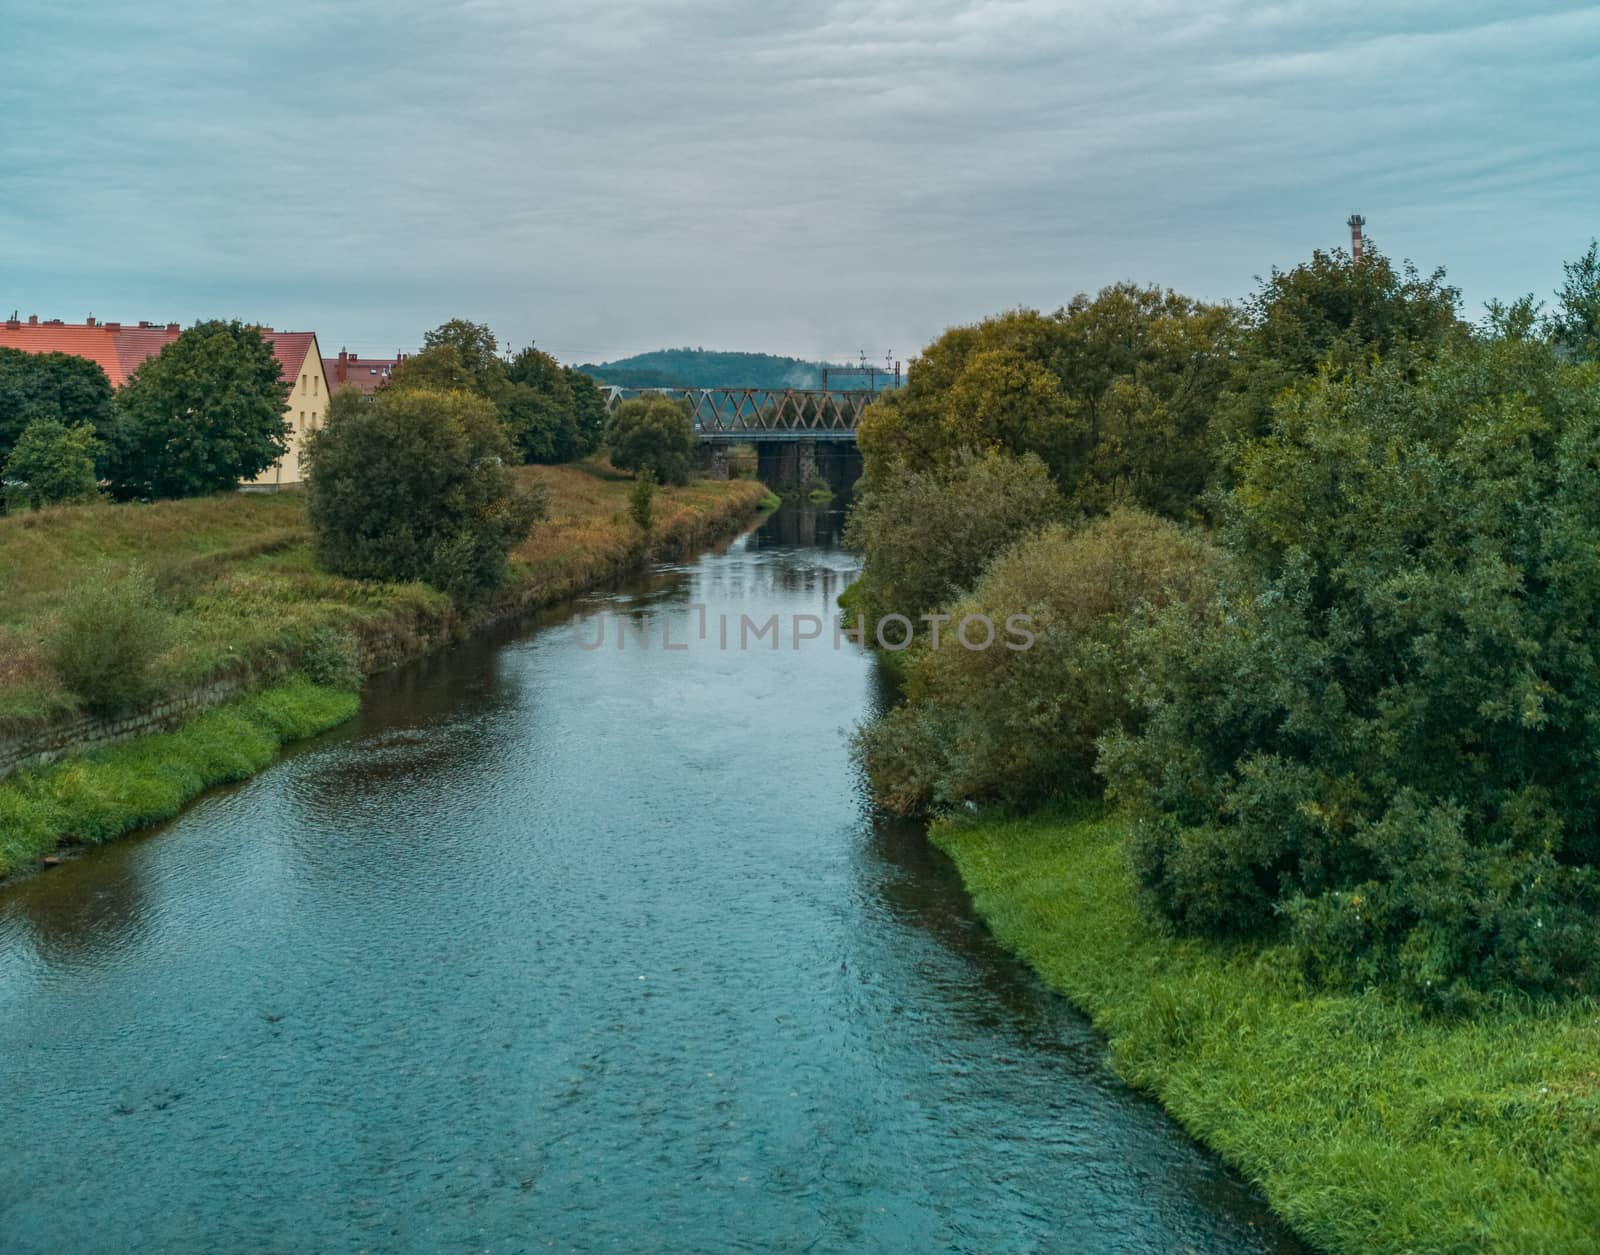 Cloudy Landscape of small river between bushes and trees with train bridge over it by Wierzchu